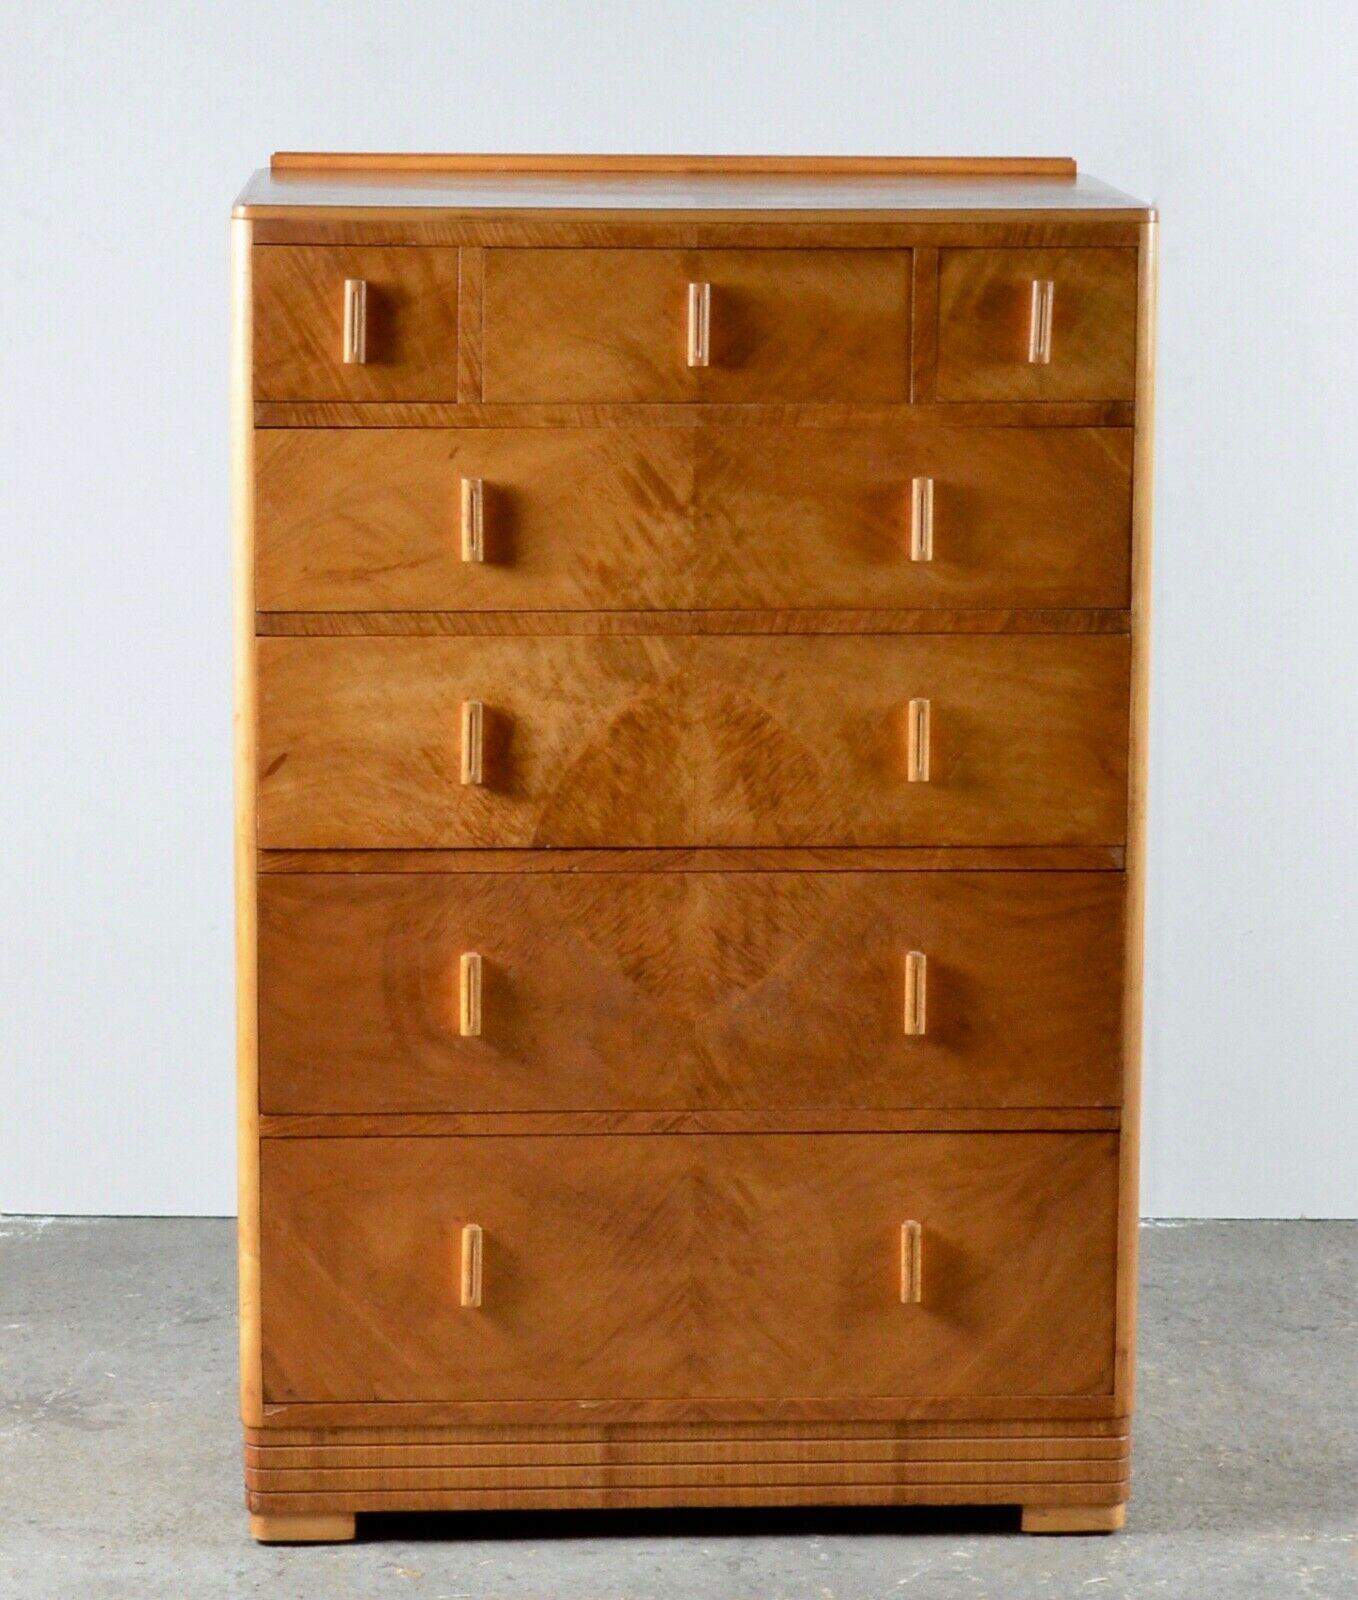 We are delighted to offer for sale this mid 20th century Army & Navy Ltd Art Deco style Maple chest of drawers. A very good-looking chest of drawers the wood is rich maple and glows in the light, it has seven drawers and is stamped Army & Navy,